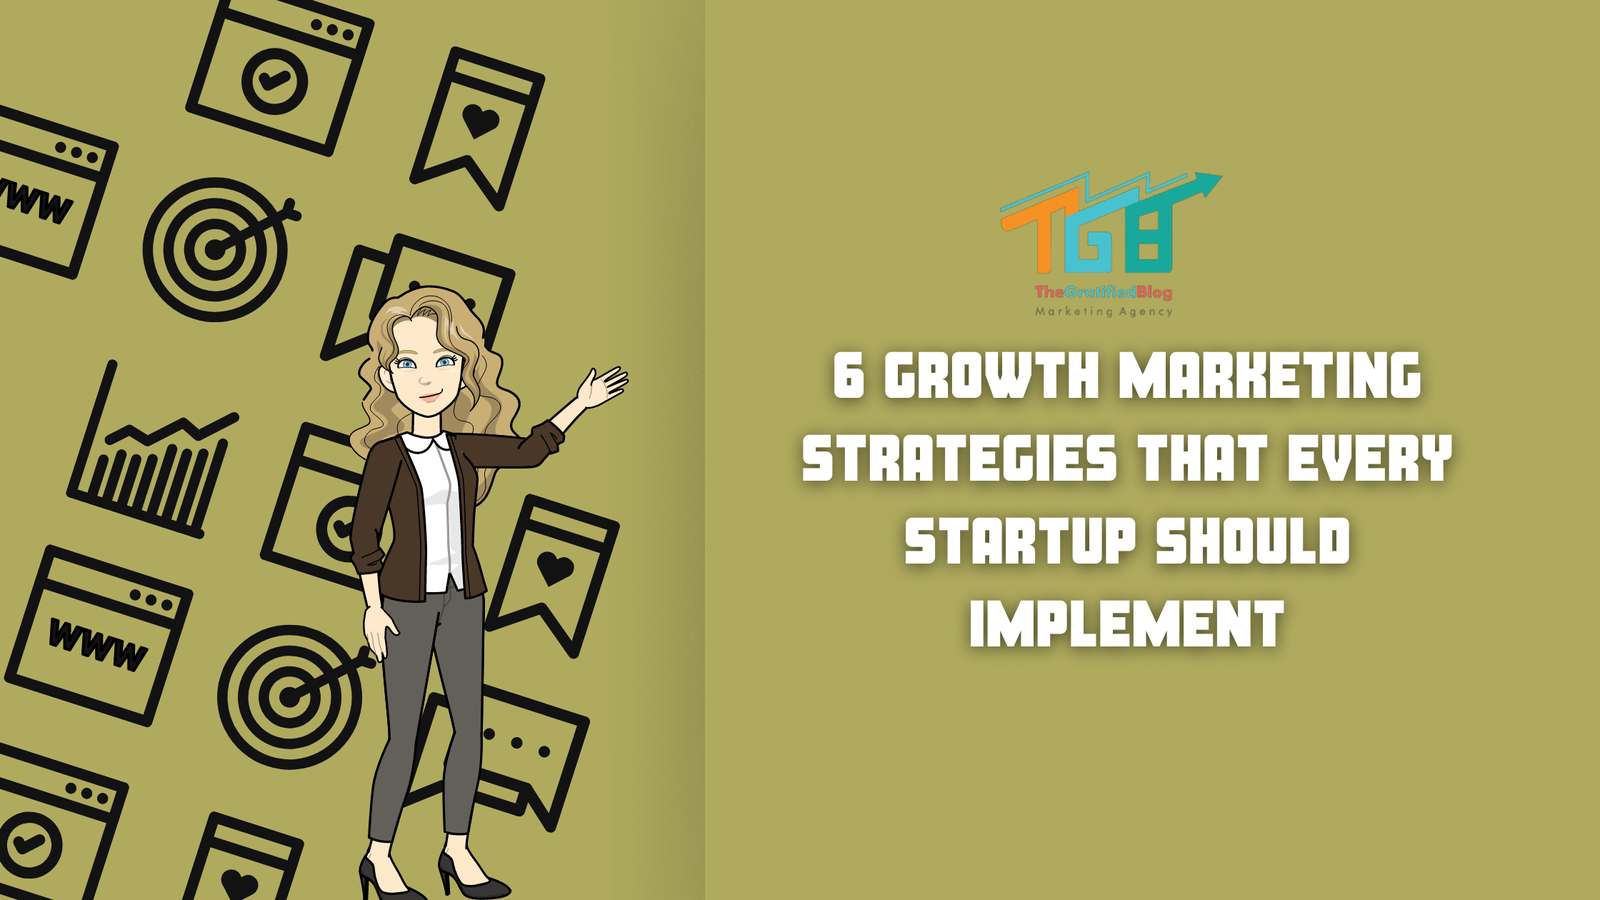 6 Growth Marketing Strategies That Every Startup Should Implement